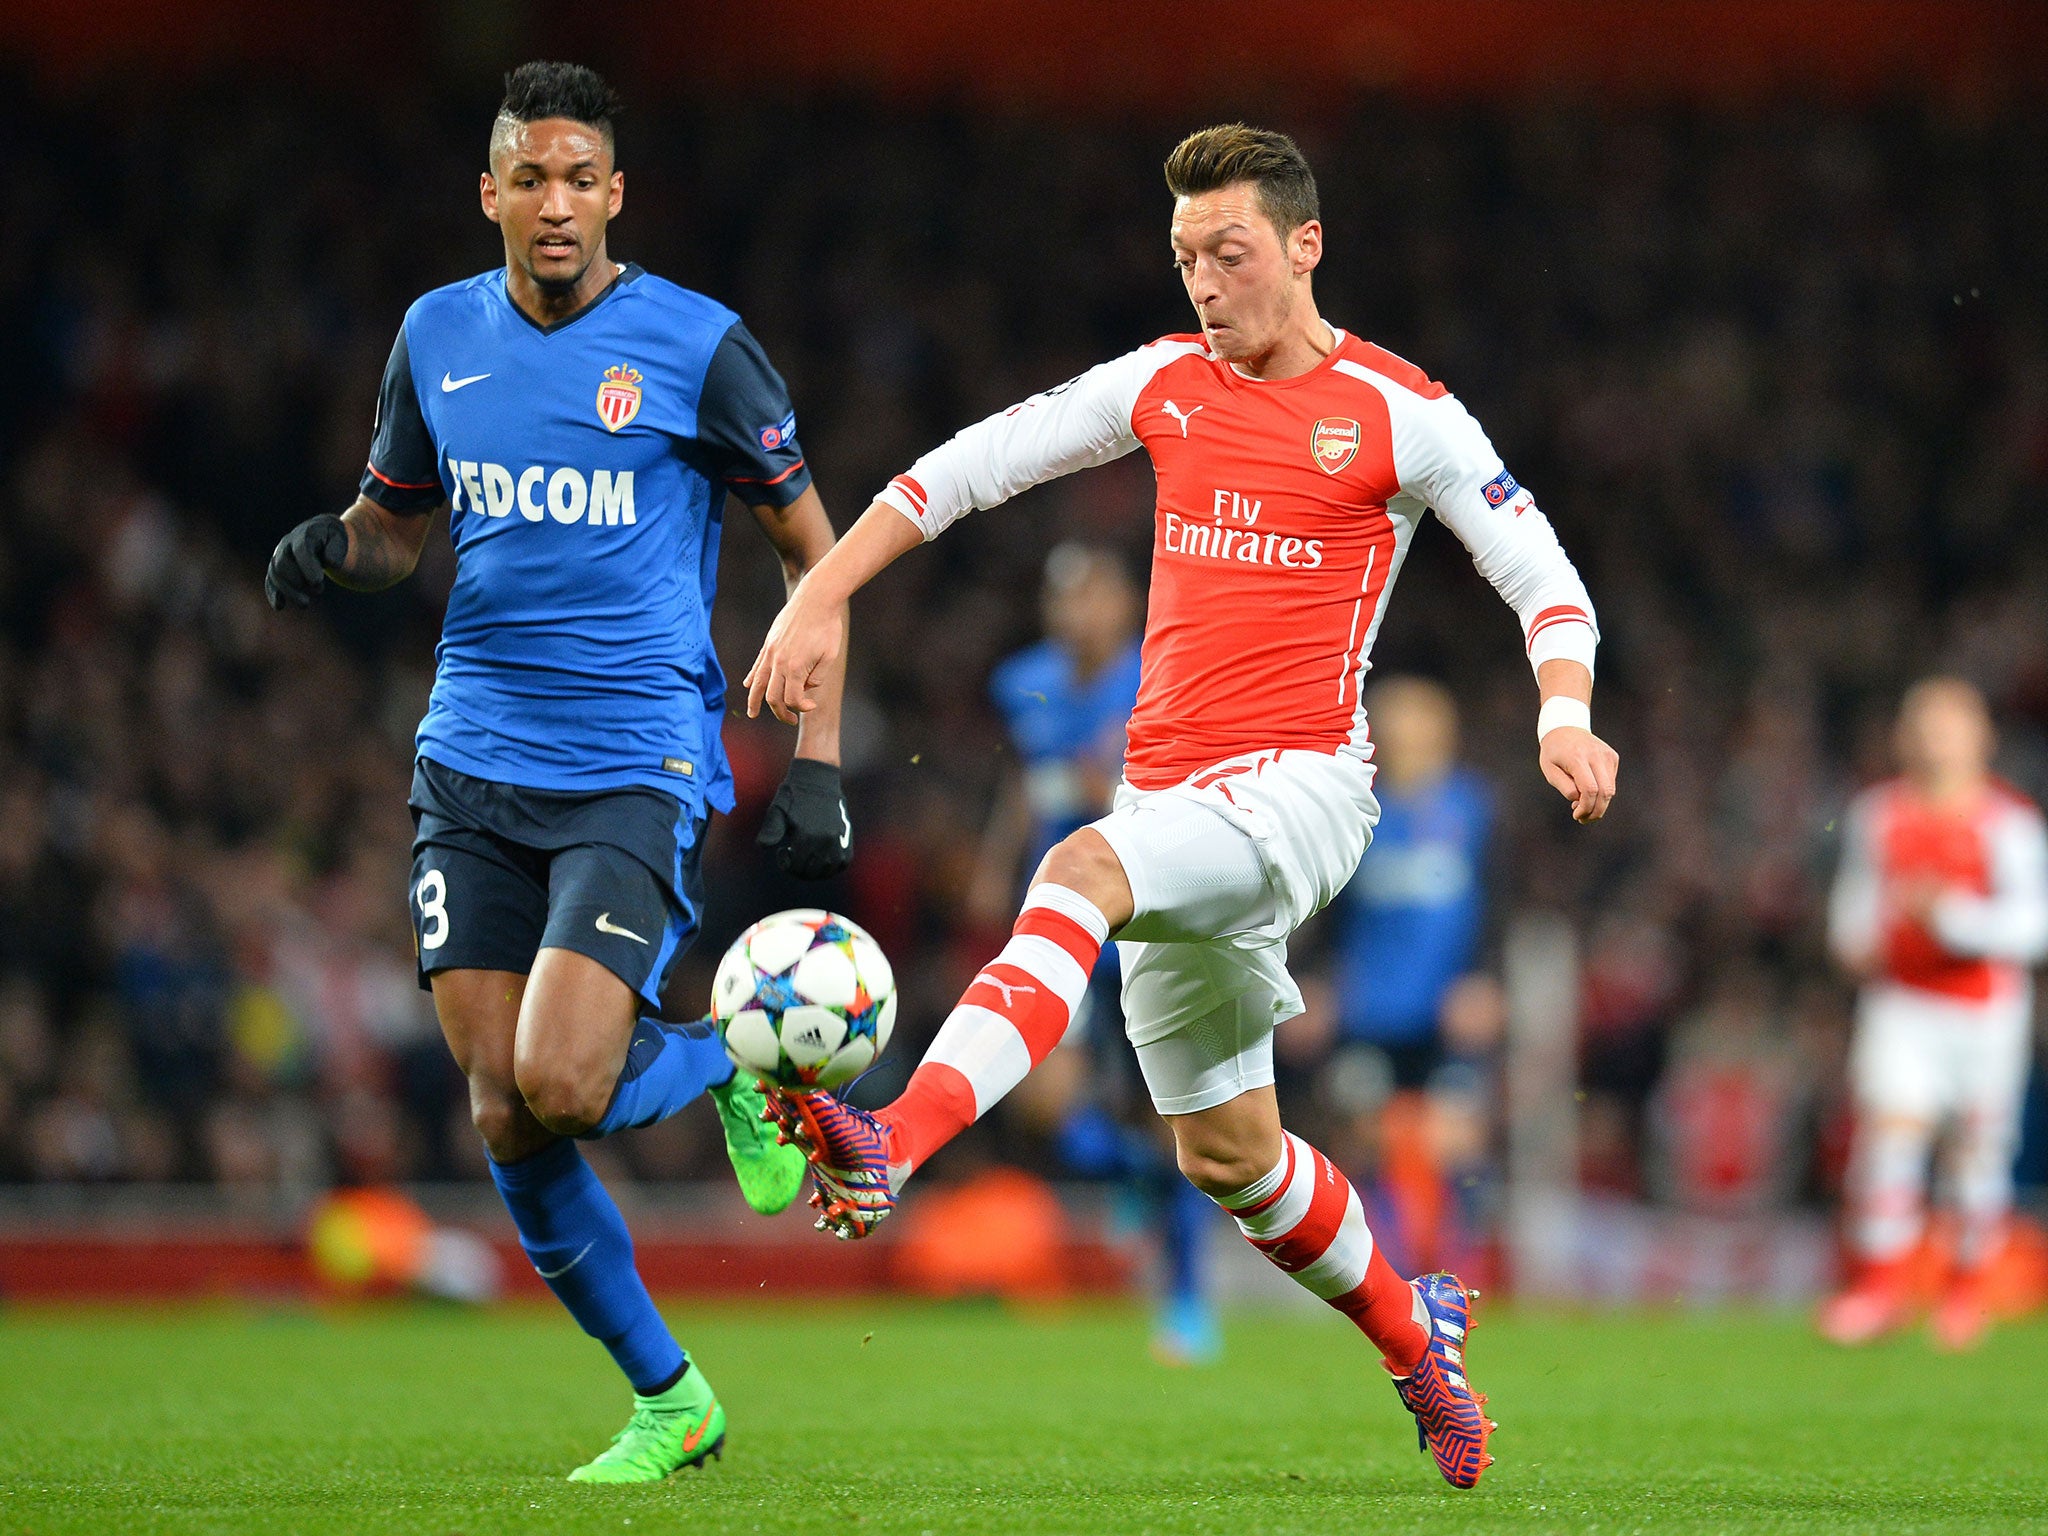 Scholes thinks Mesut Özil took the easy option in joining Arsenal